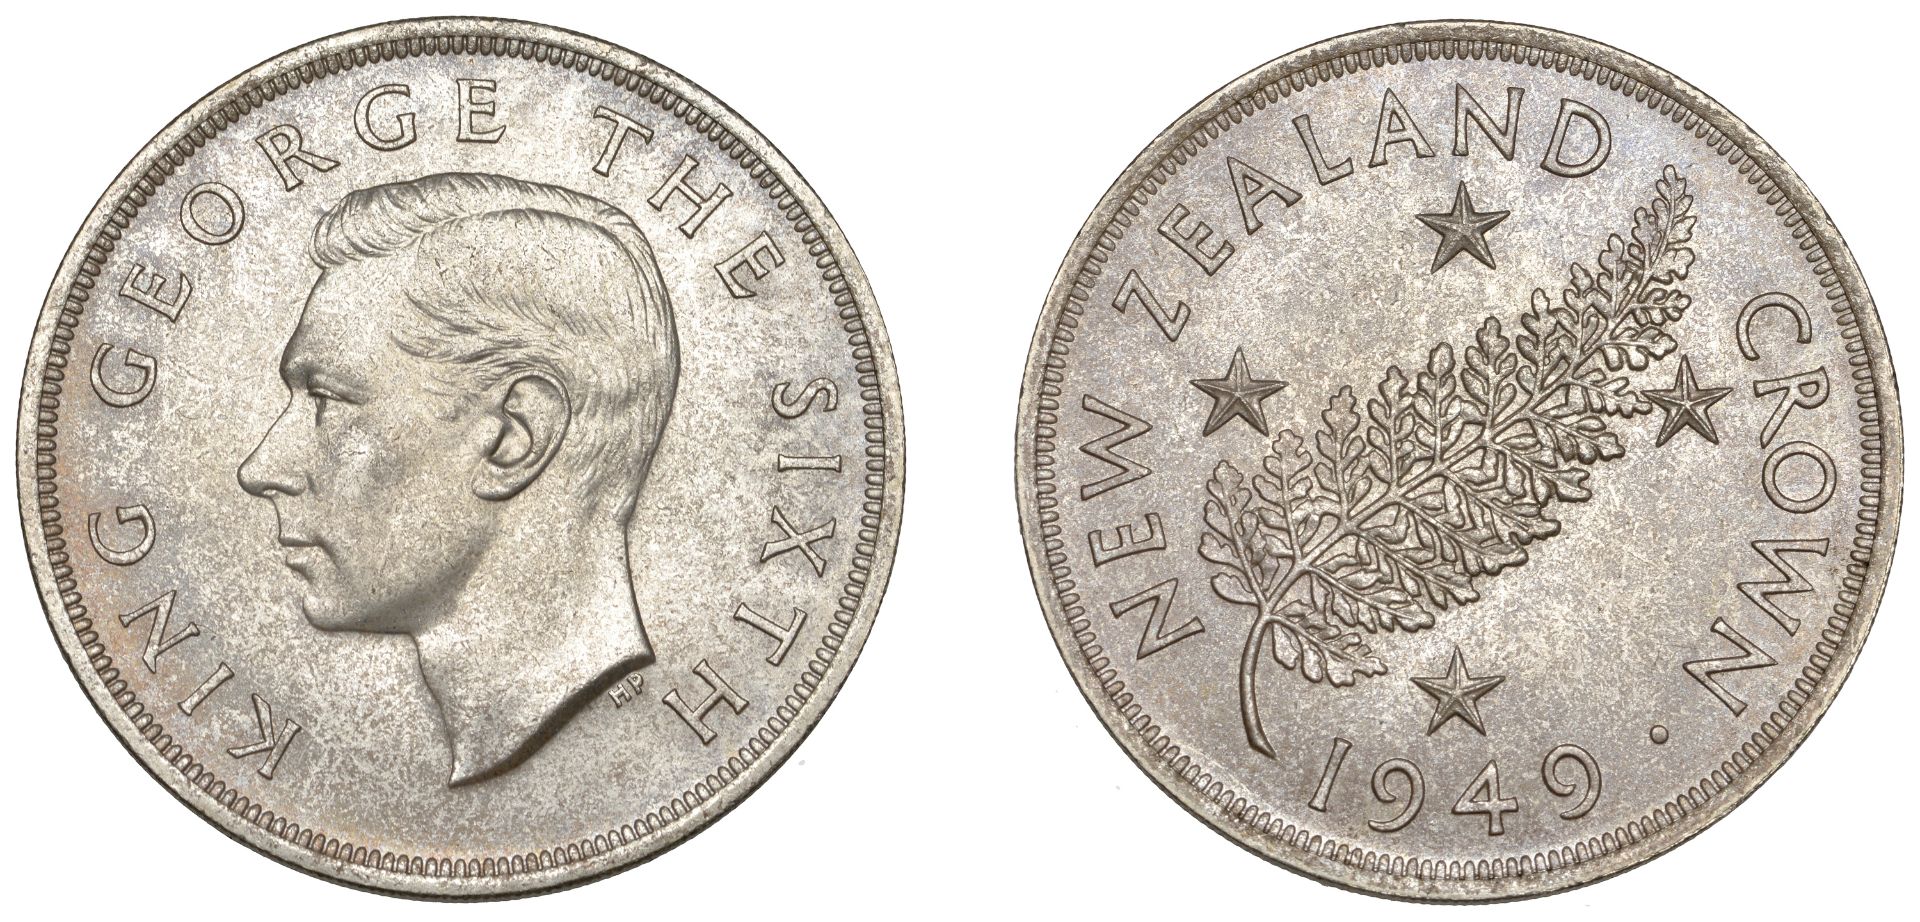 New Zealand, George VI, Crown, 1949 (KM 22). Good extremely fine, lightly toned [slabbed NGC...